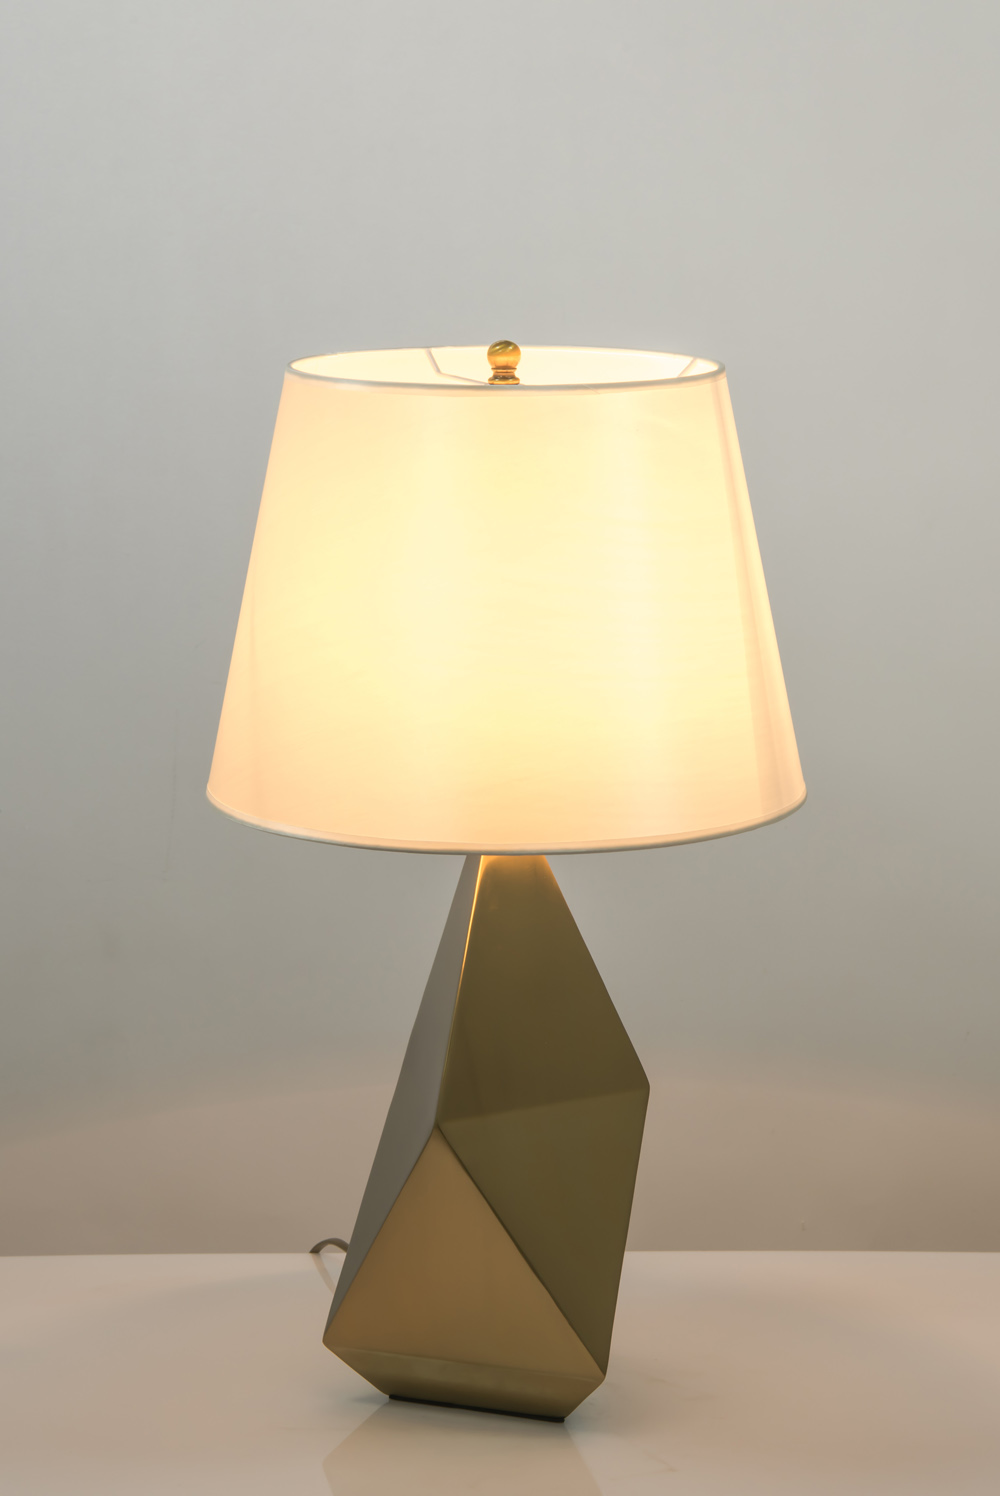 touch bedside lamps